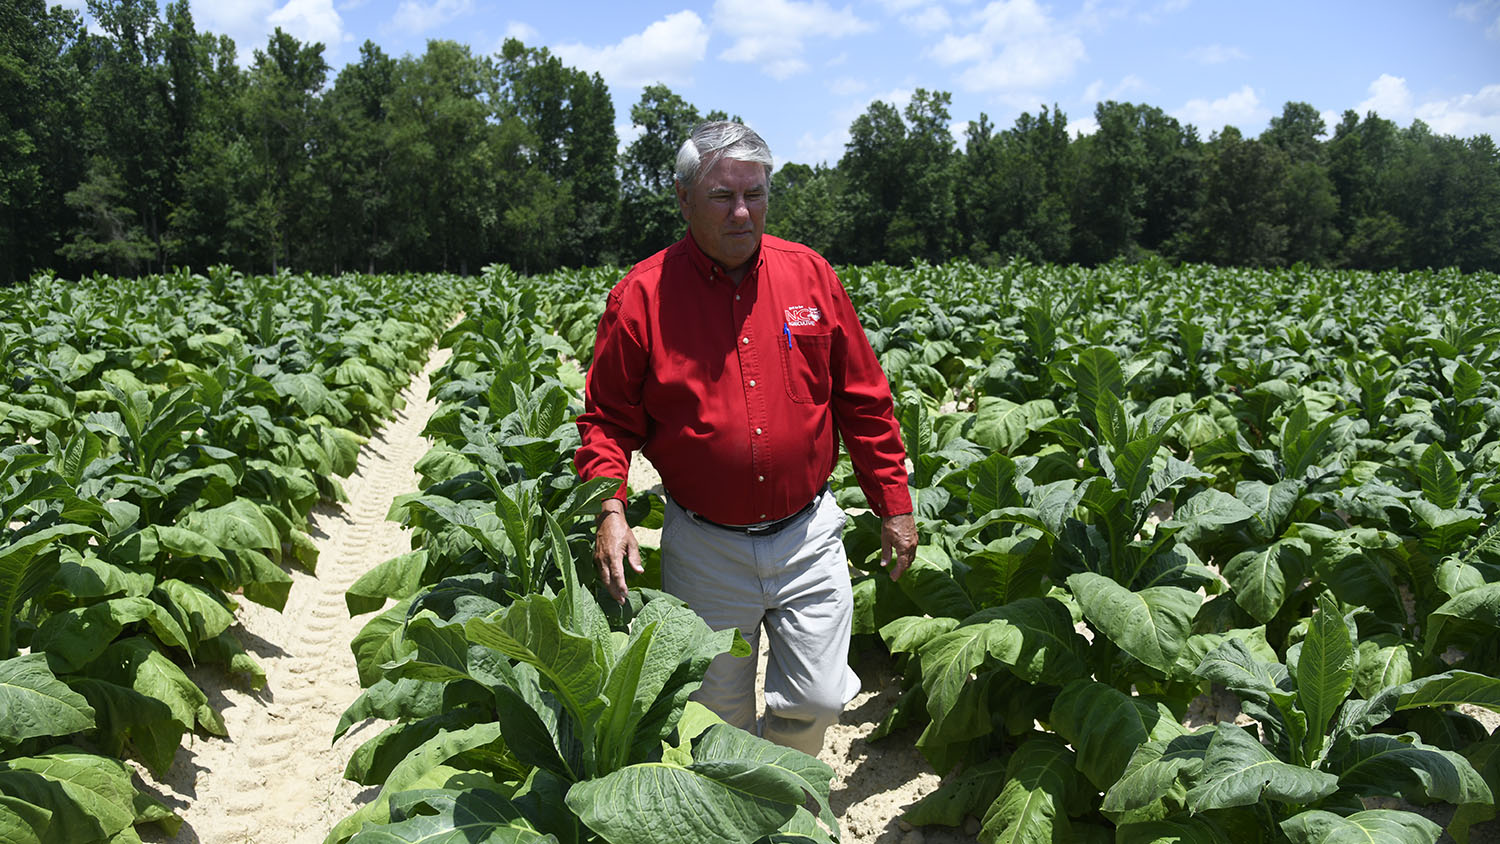 Man in red shirt standing in a field of tobacco